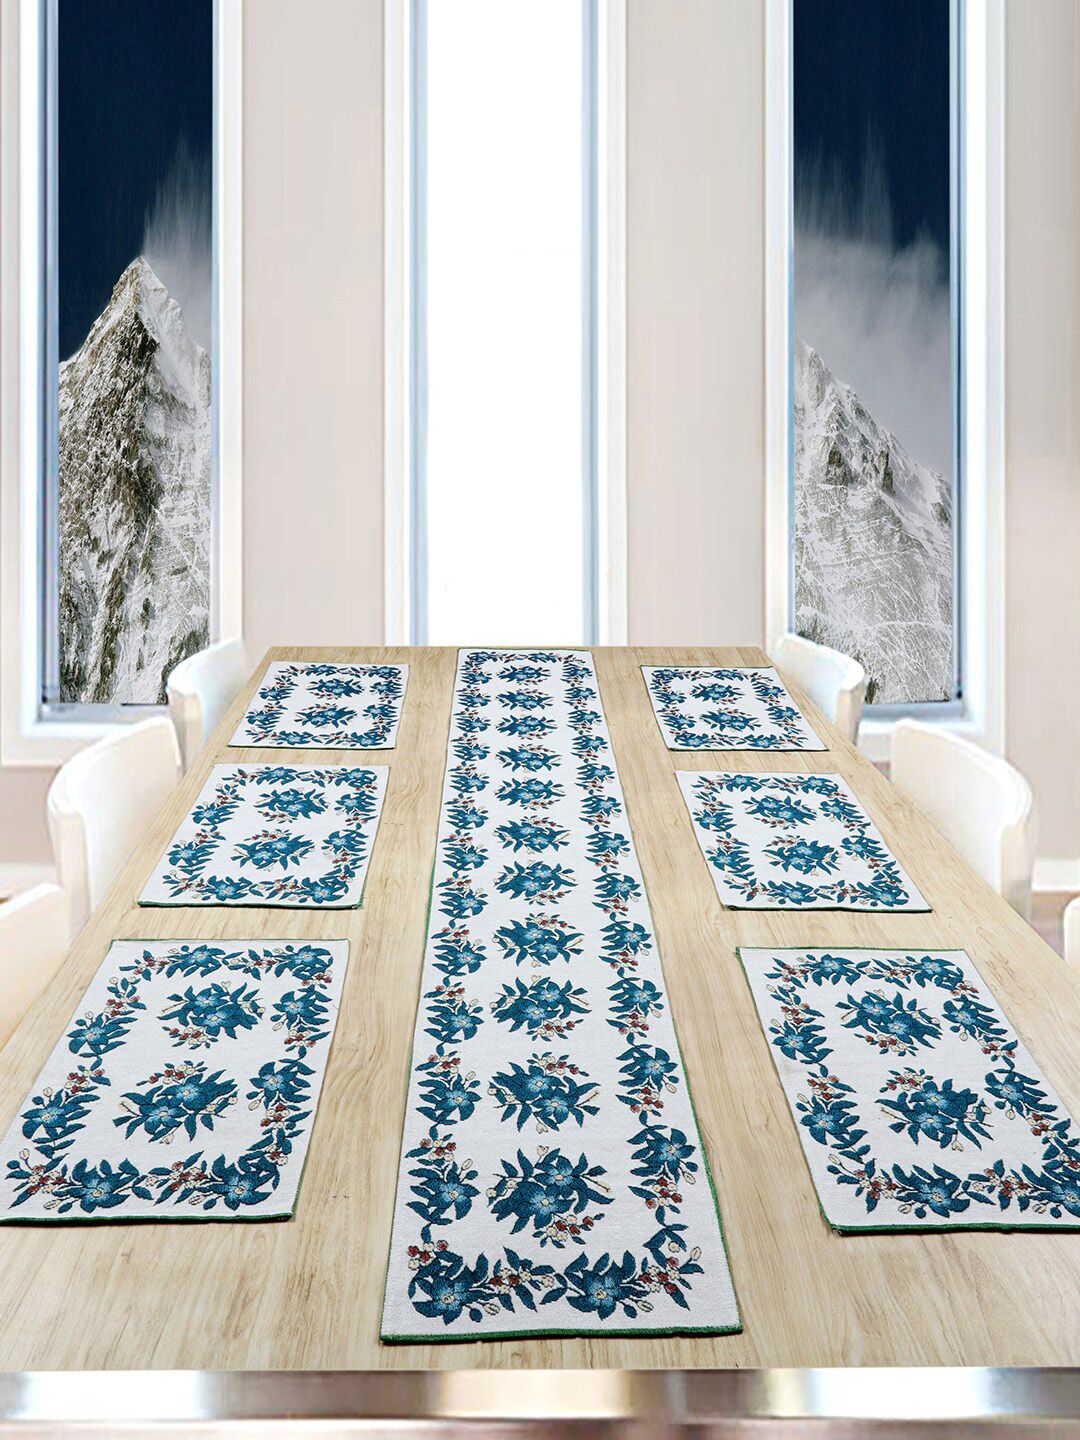 BELLA TRUE Set Of 7 White & Teal Blue Floral Printed Jacquard Table Placement & Runner Set Price in India